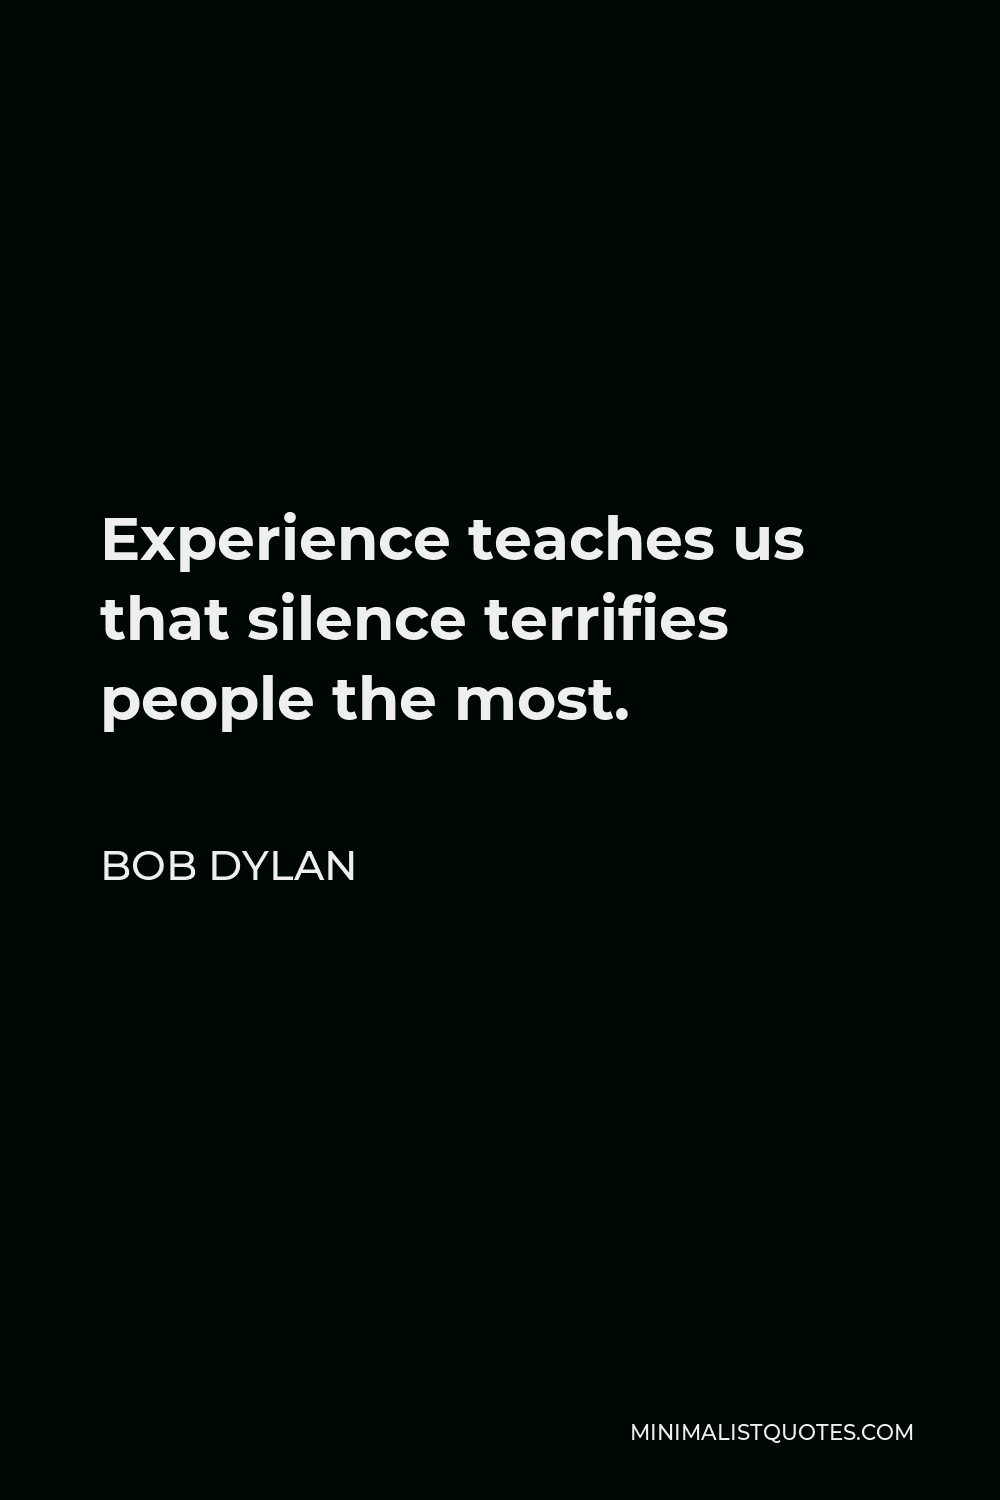 Bob Dylan Quote - Experience teaches us that silence terrifies people the most.